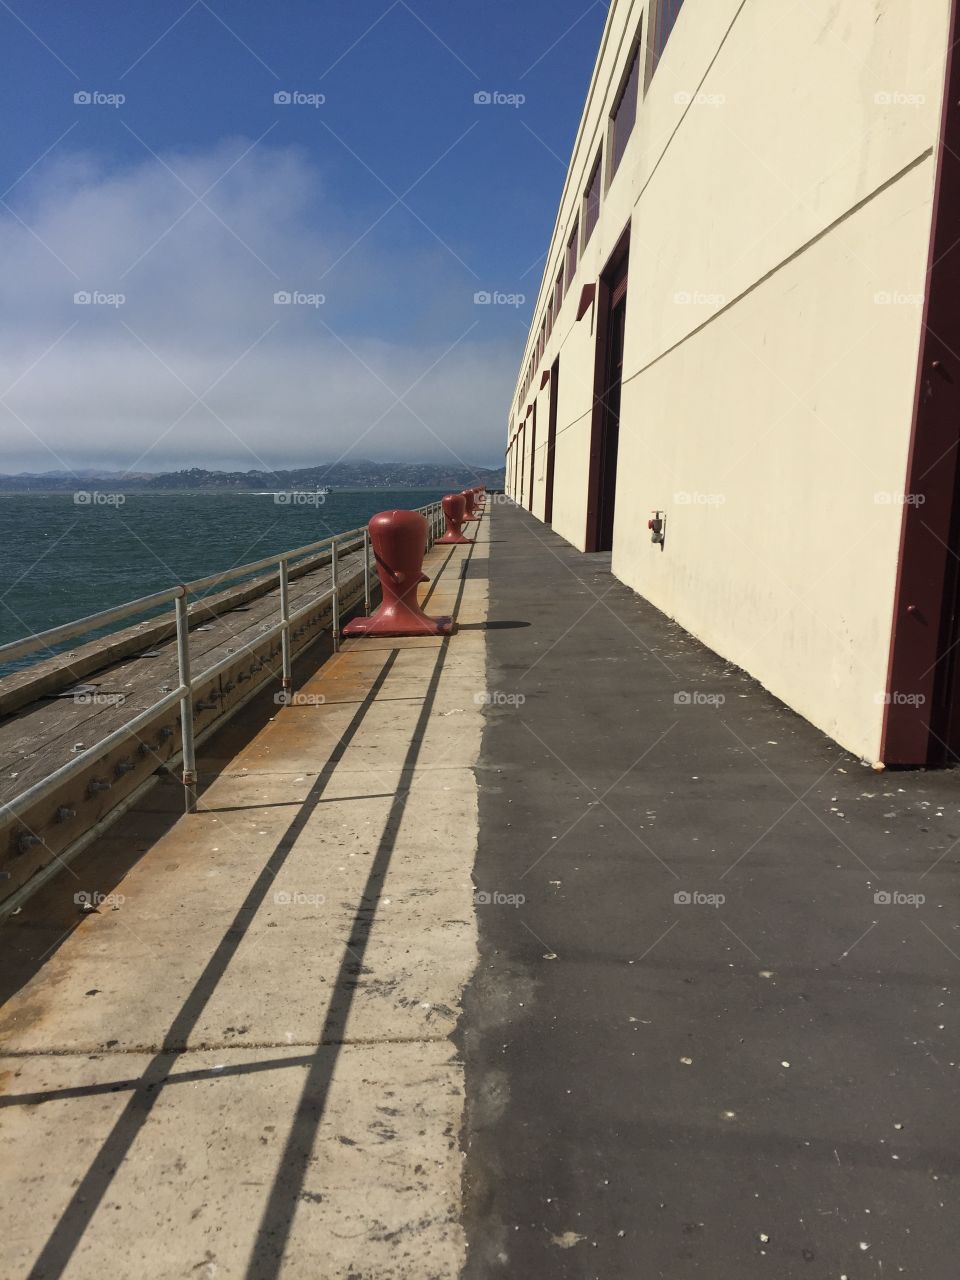 The Cowell Theater at Fort Mason